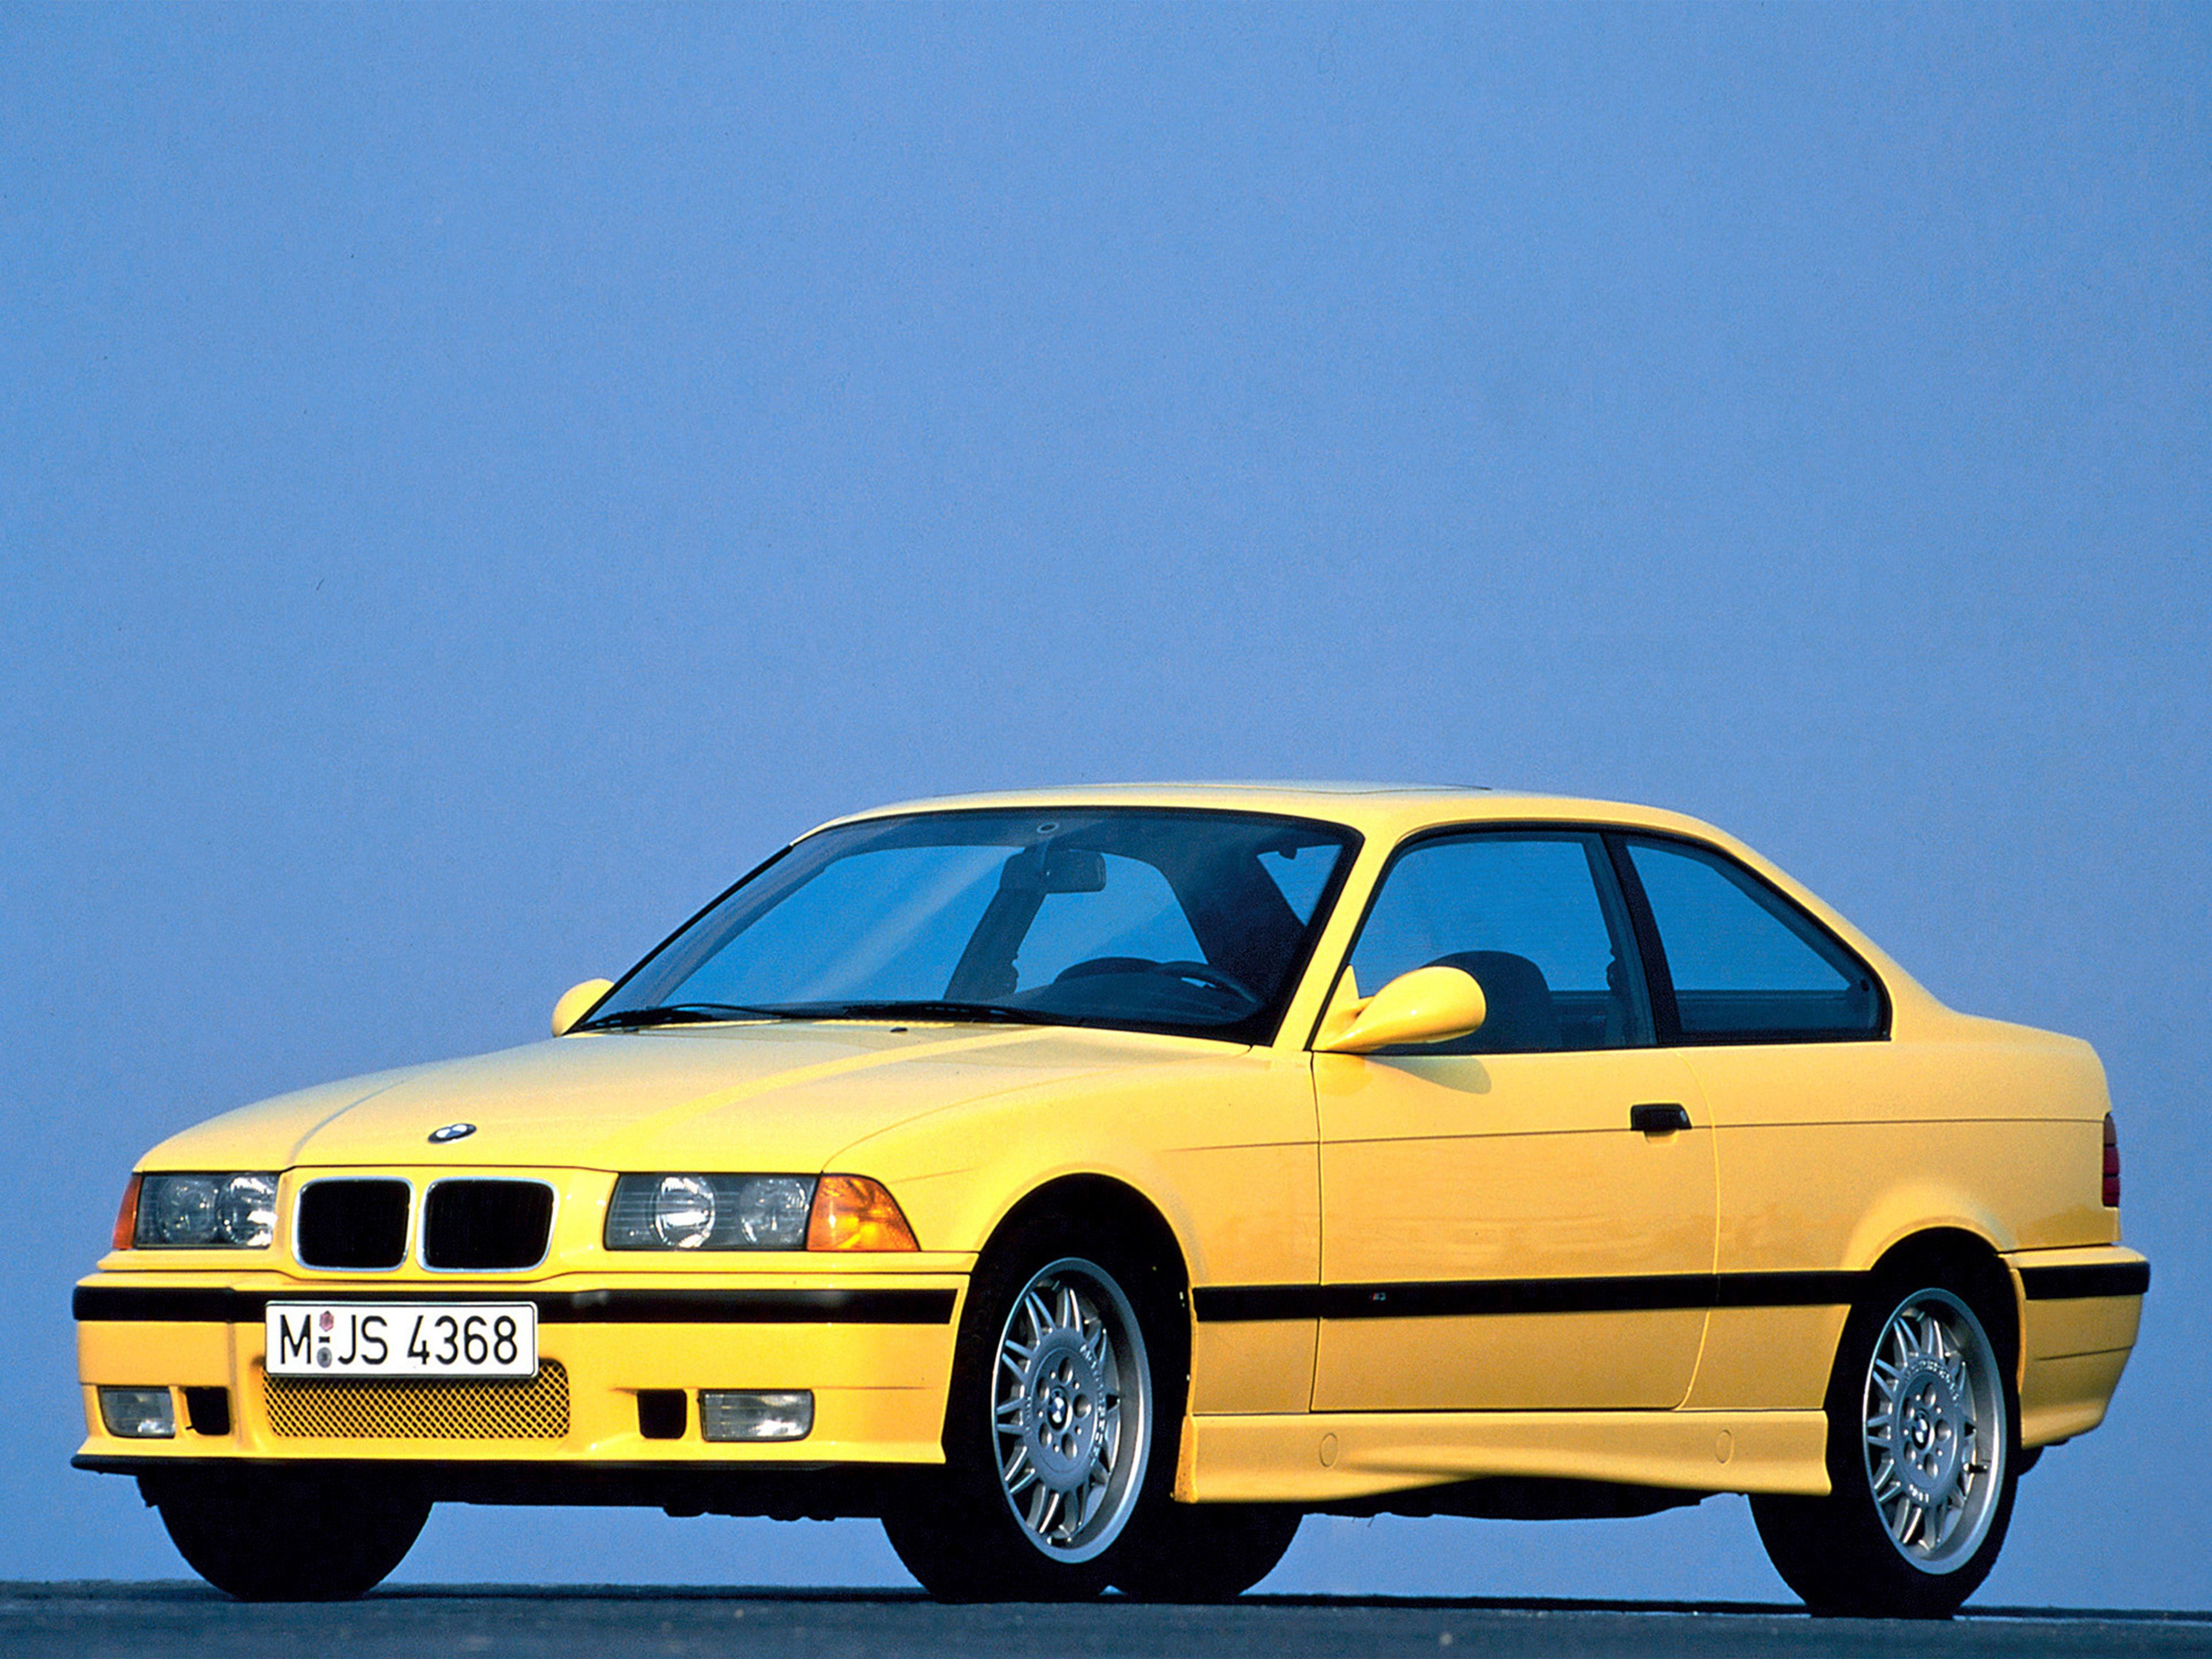 1992, Bmw, M3 coupe, Car, Sport, Supercar, Germany, 4000x3000 Wallpaper